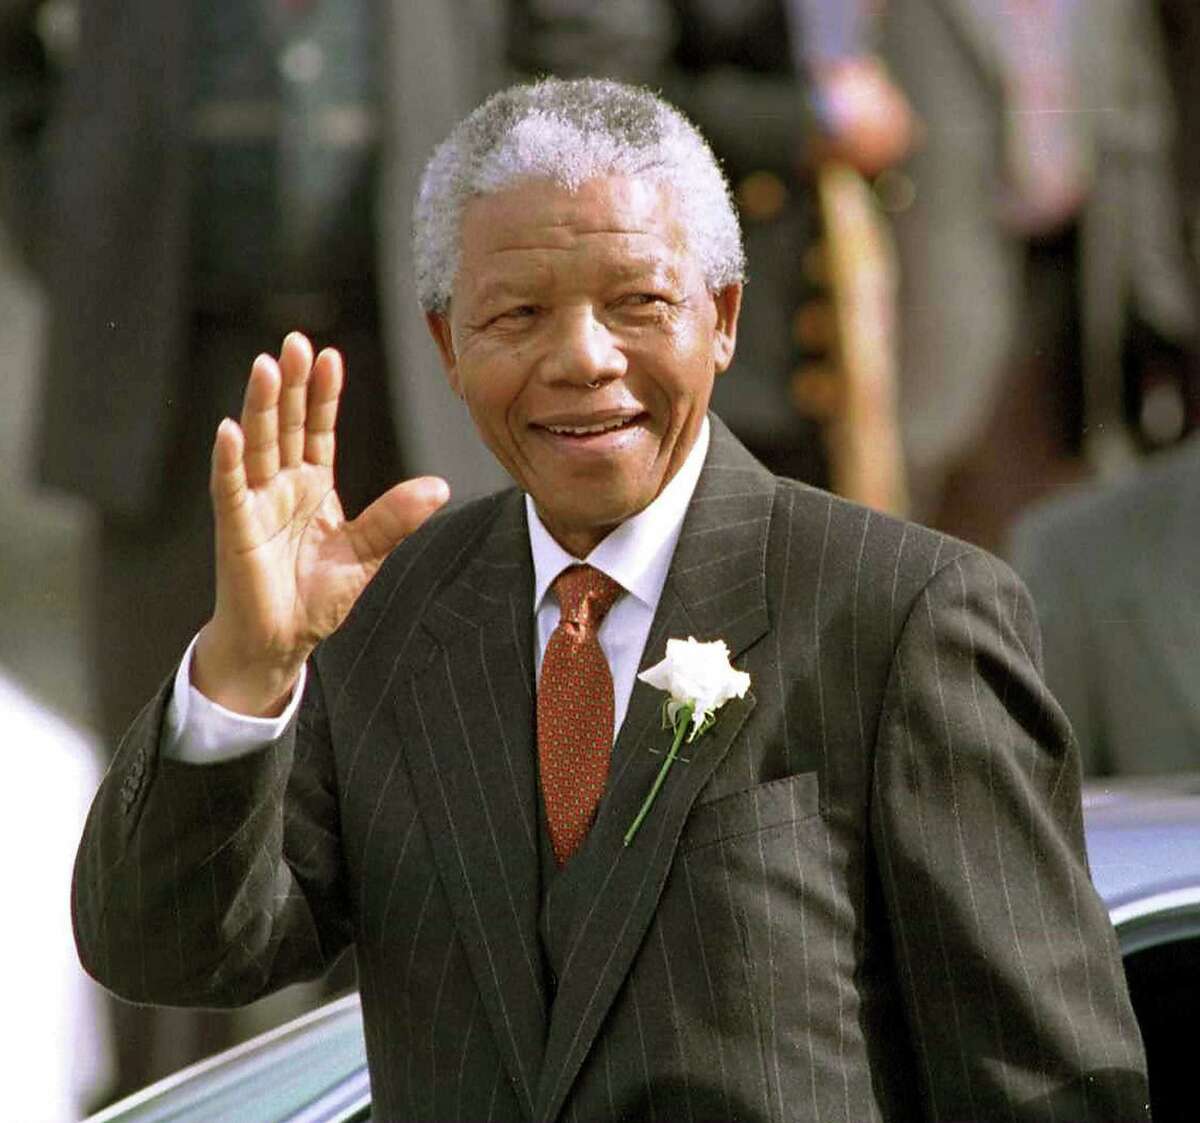 South African President Nelson Mandela makes his way to Parliament in Cape Town, South Africa, in this May 9, 1994, file photo. Mandela died on Thursday. He became an icon for freedom and equality.